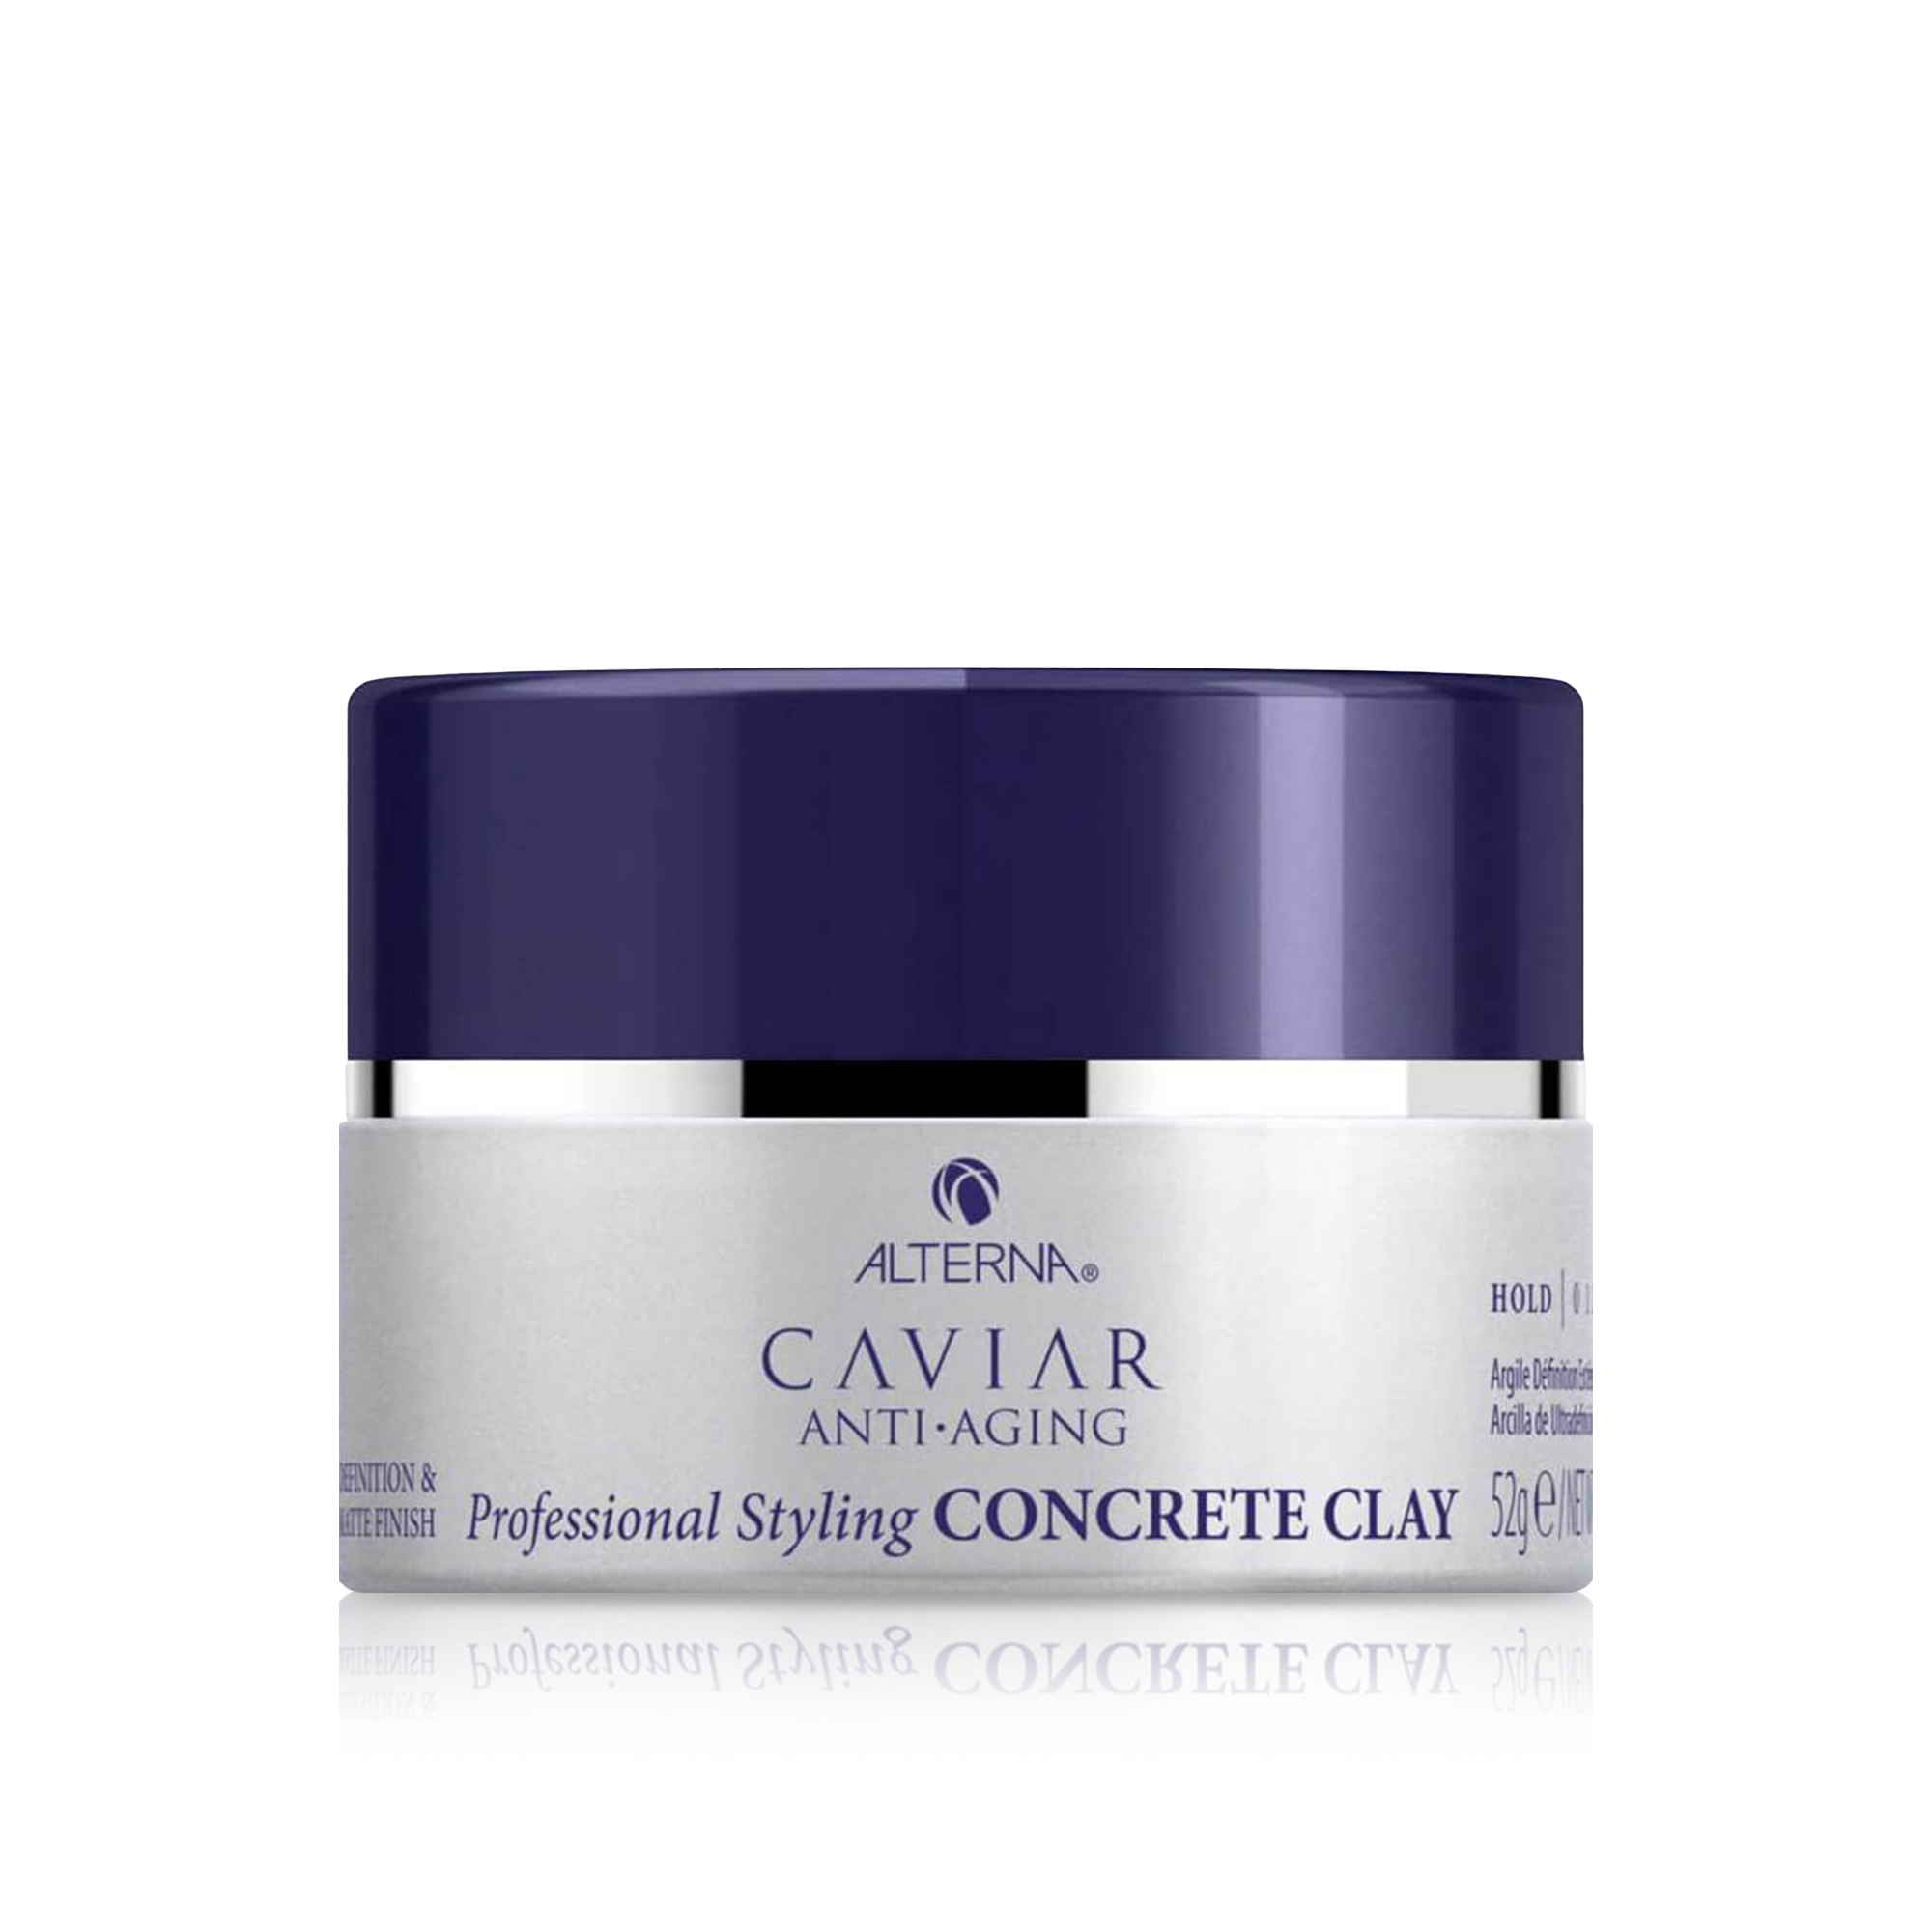 Caviar Anti-Aging Professional Styling Concrete Clay